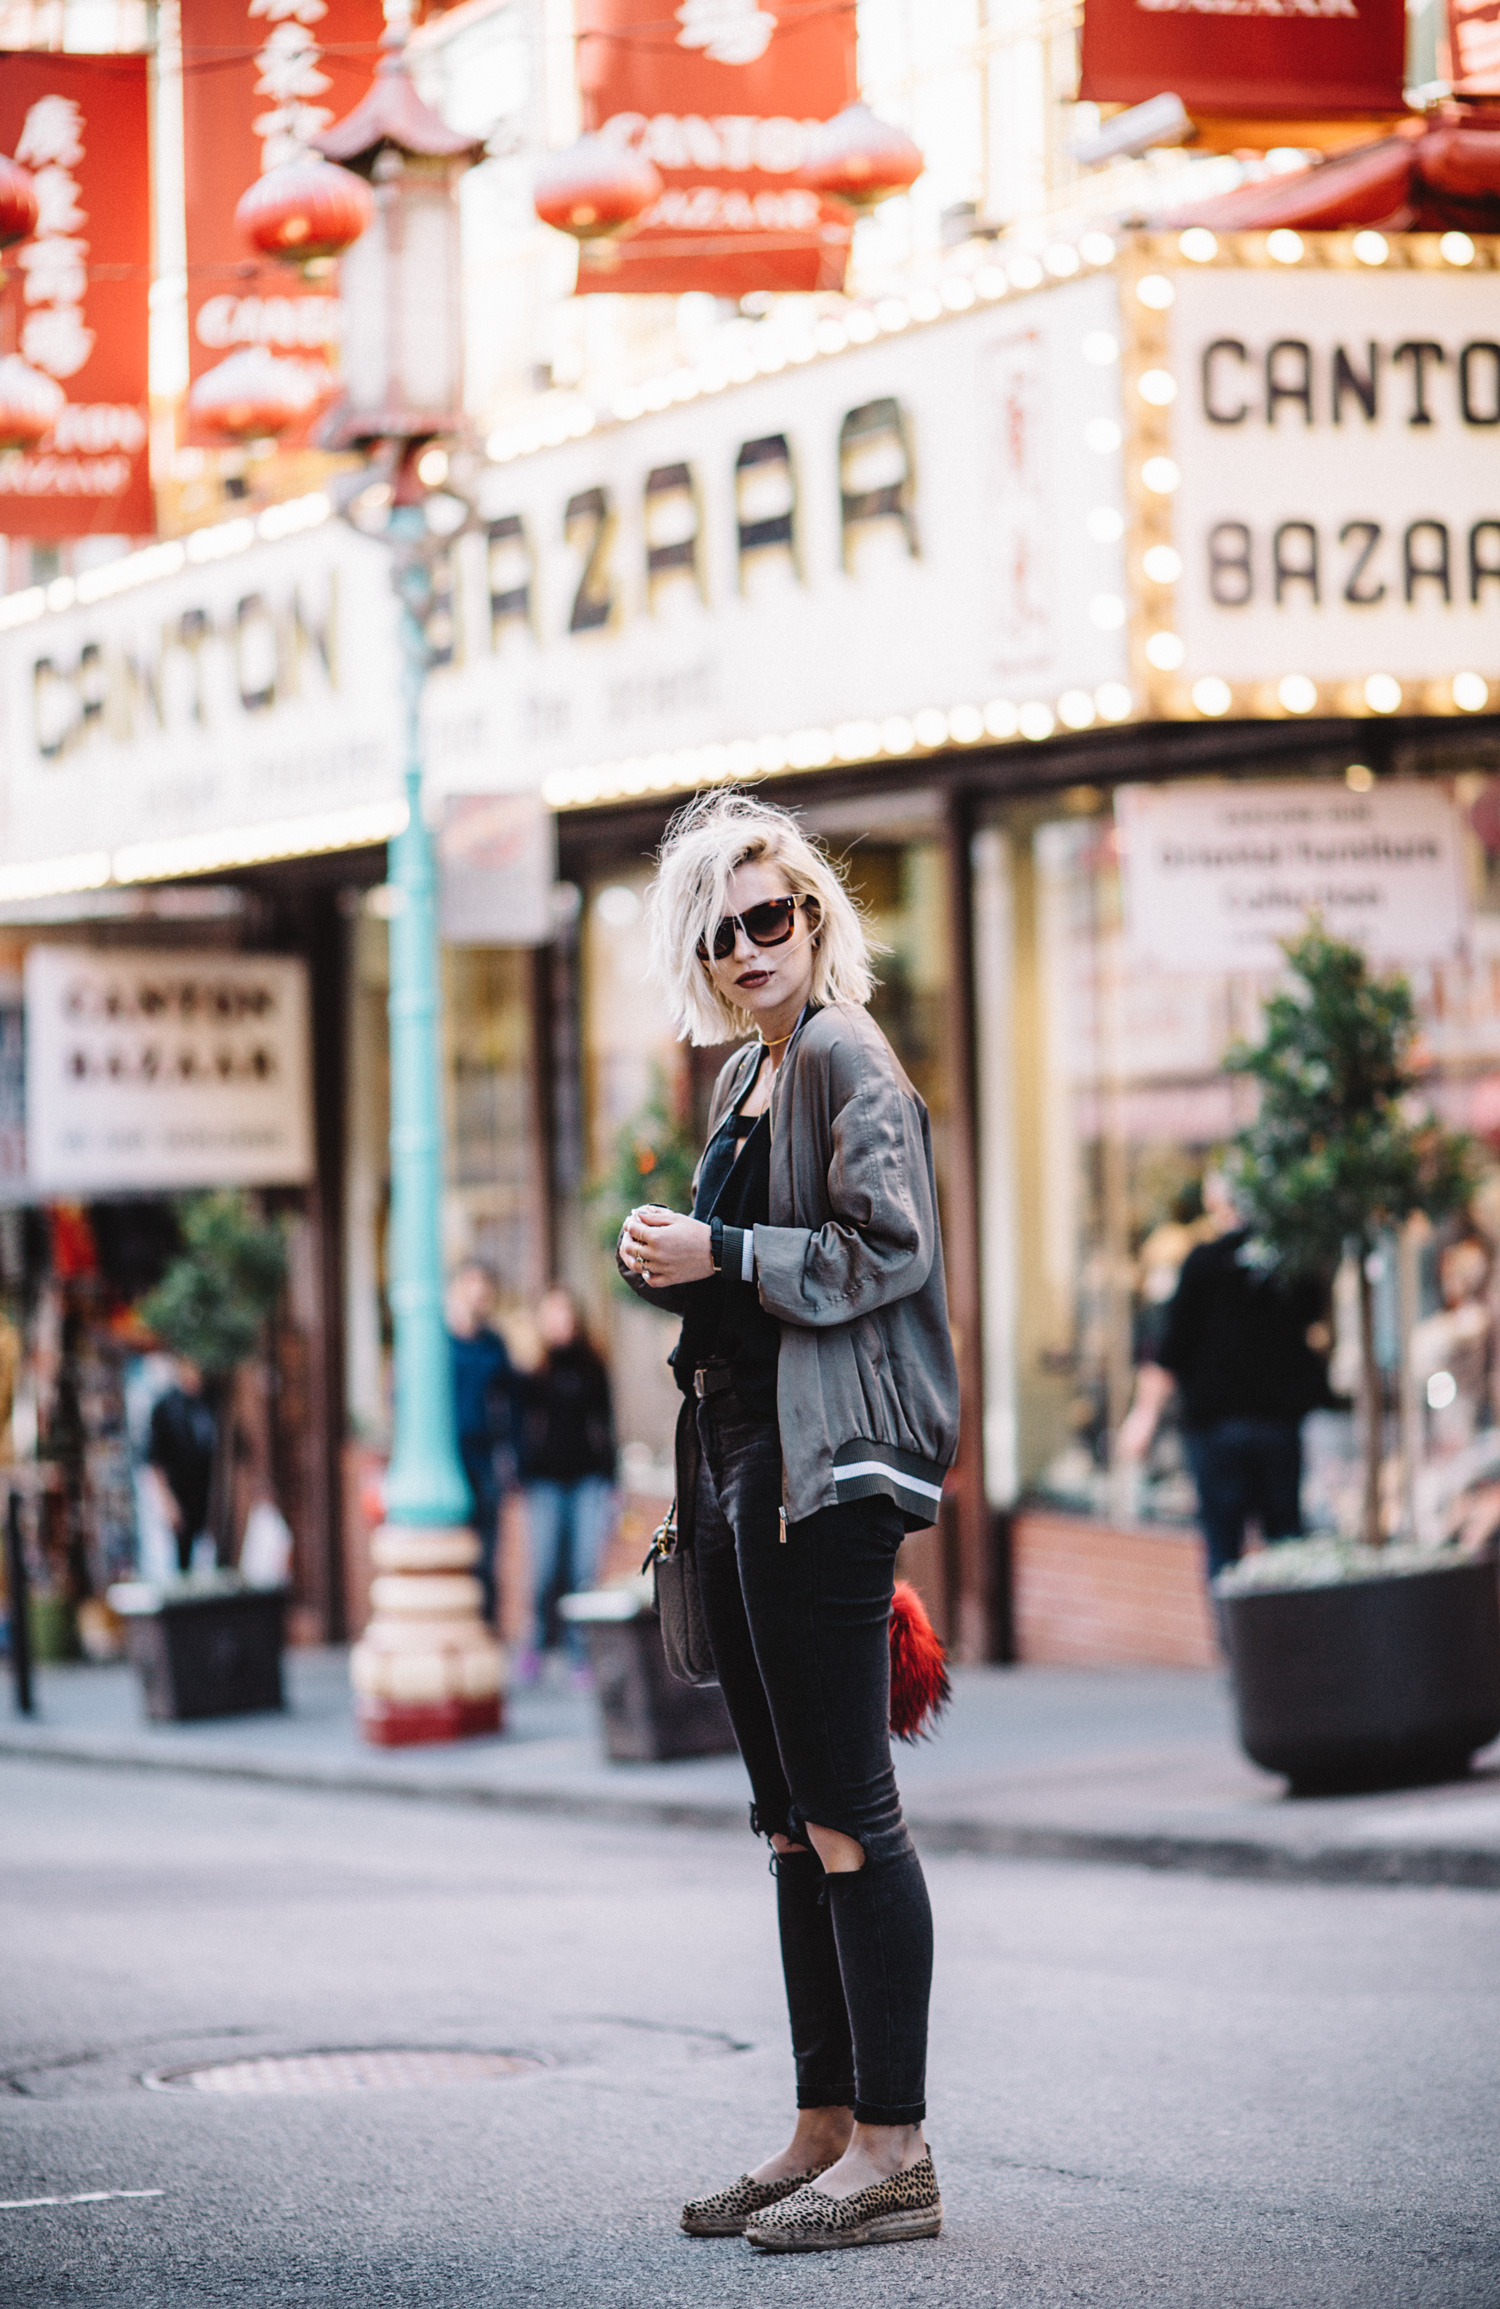 Chinatown in San Francisco | view more pictures on my blog | casual city style | Pinko bomber jacket, Filippa K. top, Nixon watch, Escada sunnies, Asos distressed grey jeans | fashion blogger | 